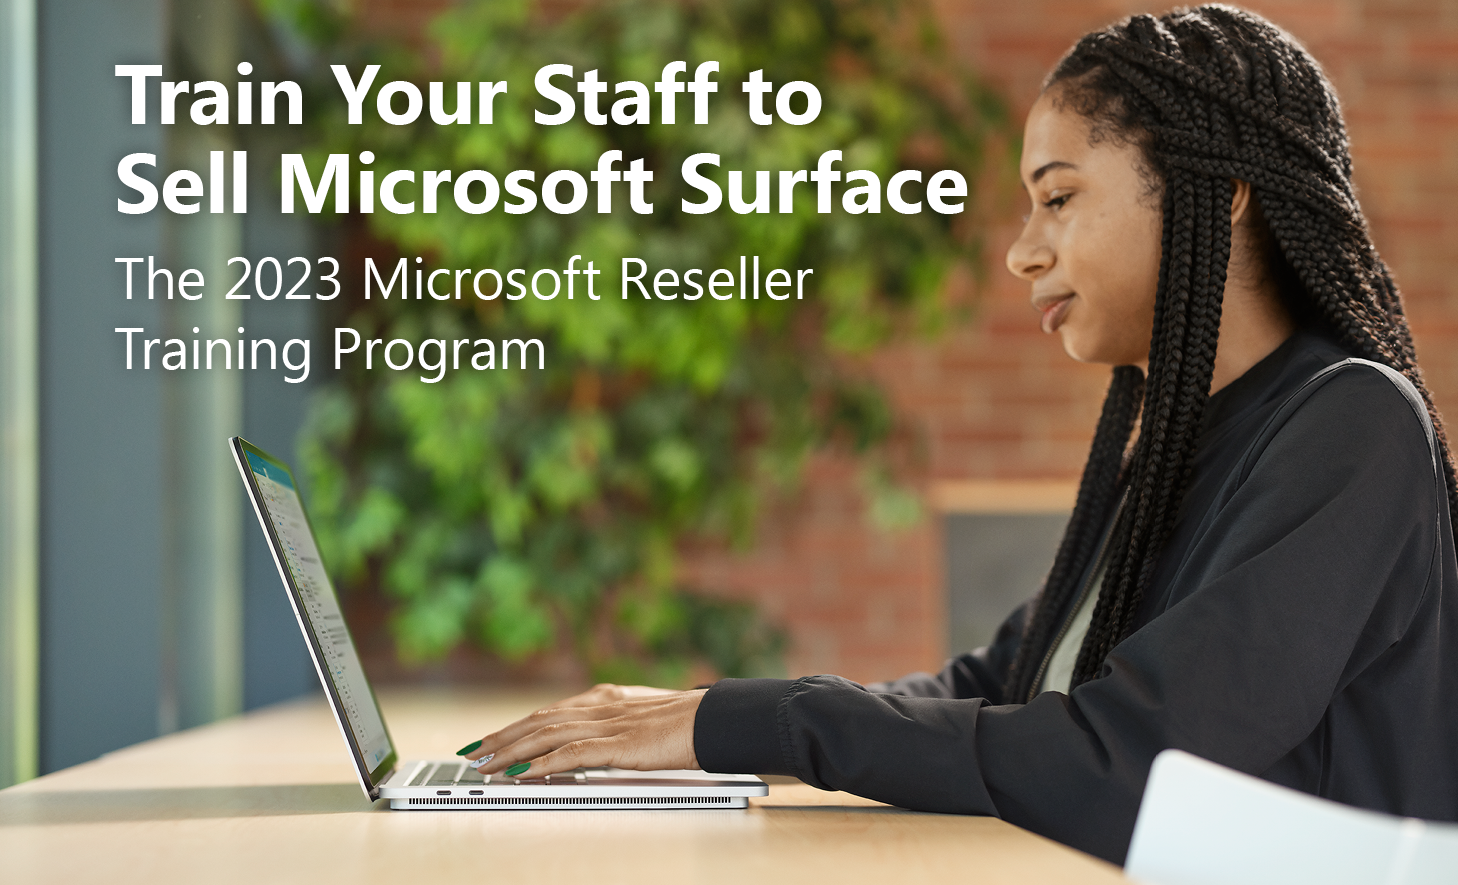 Become a Microsoft Surface Expert. Train Your Staff to Sell Microsoft Surface